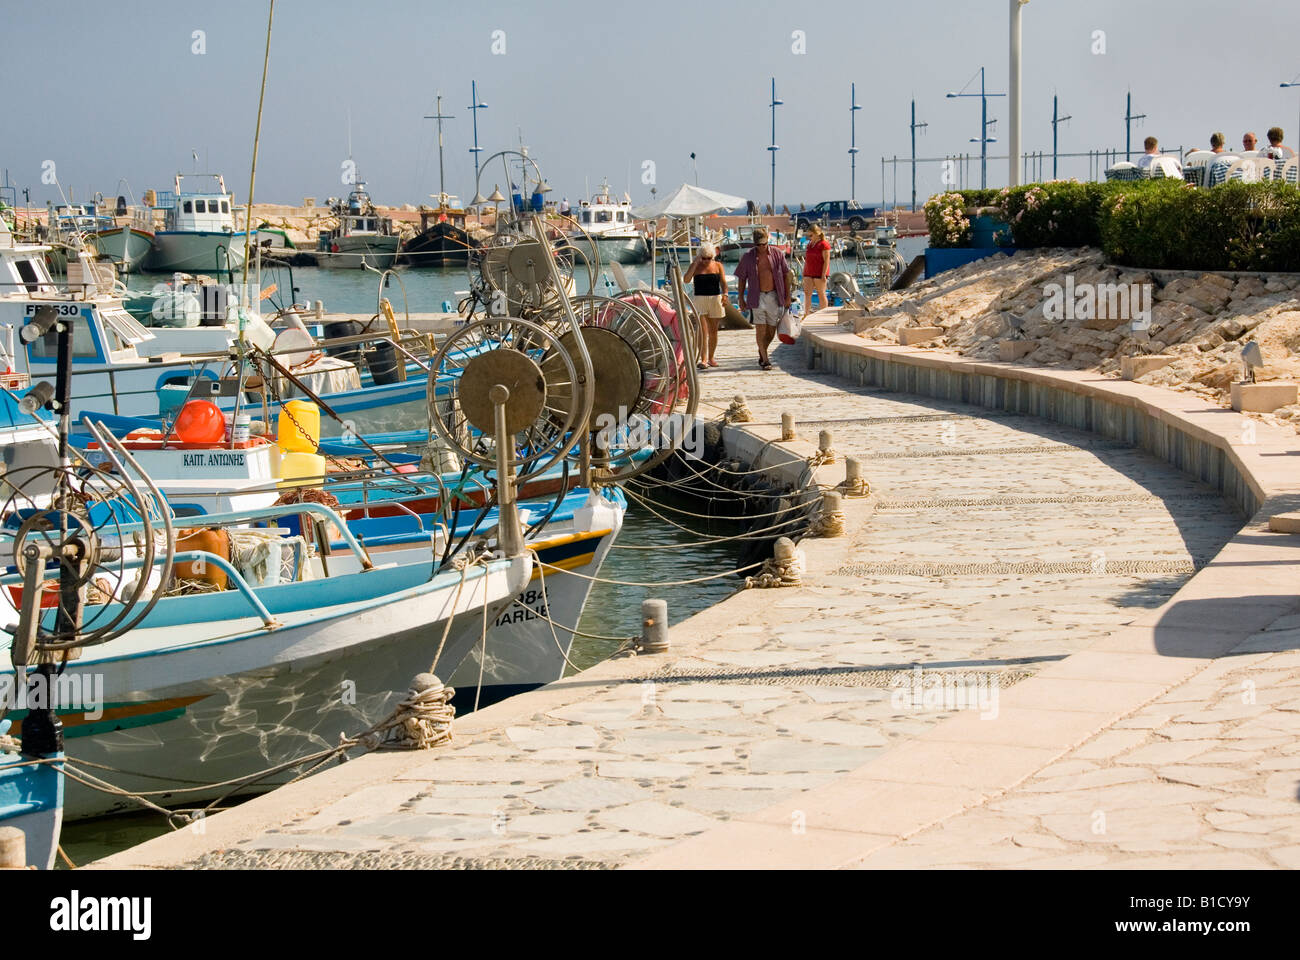 Promenade Pathway and Blue Fishing Boats in Moored in the Small Harbour at Agia Napa Cyprus Stock Photo